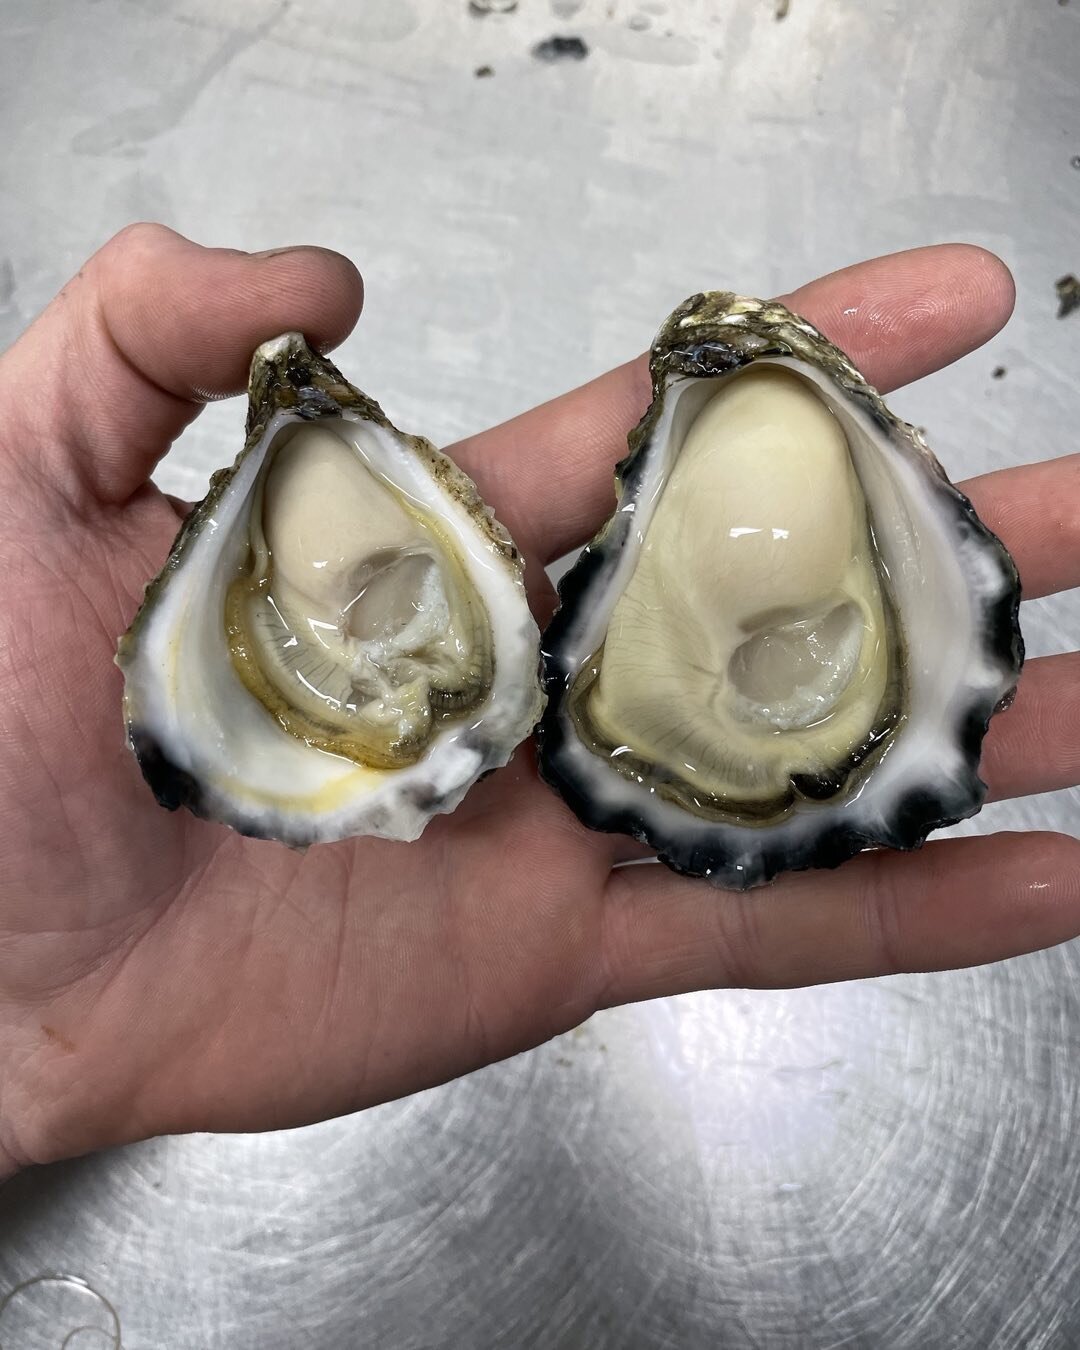 When you know you know #oysters#northernriversoyster#premiumseafood#byronbayseafood#goldcoastseafood